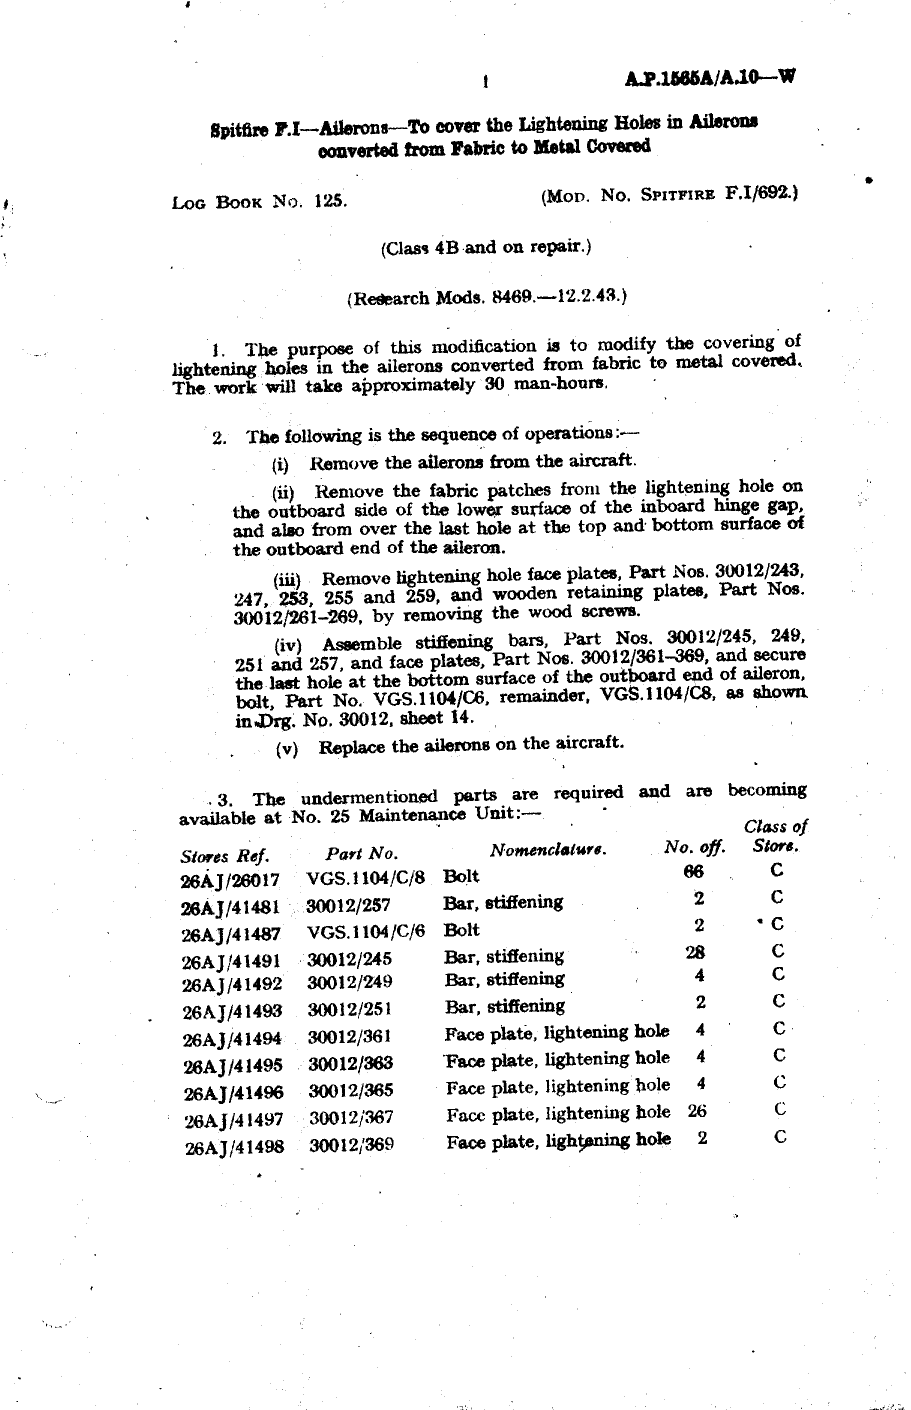 Sample page 1 from AirCorps Library document: Spitfire FI Ailerons To Cover the Lightening Holes in Ailerons Converted From Fabric to Metal Covered